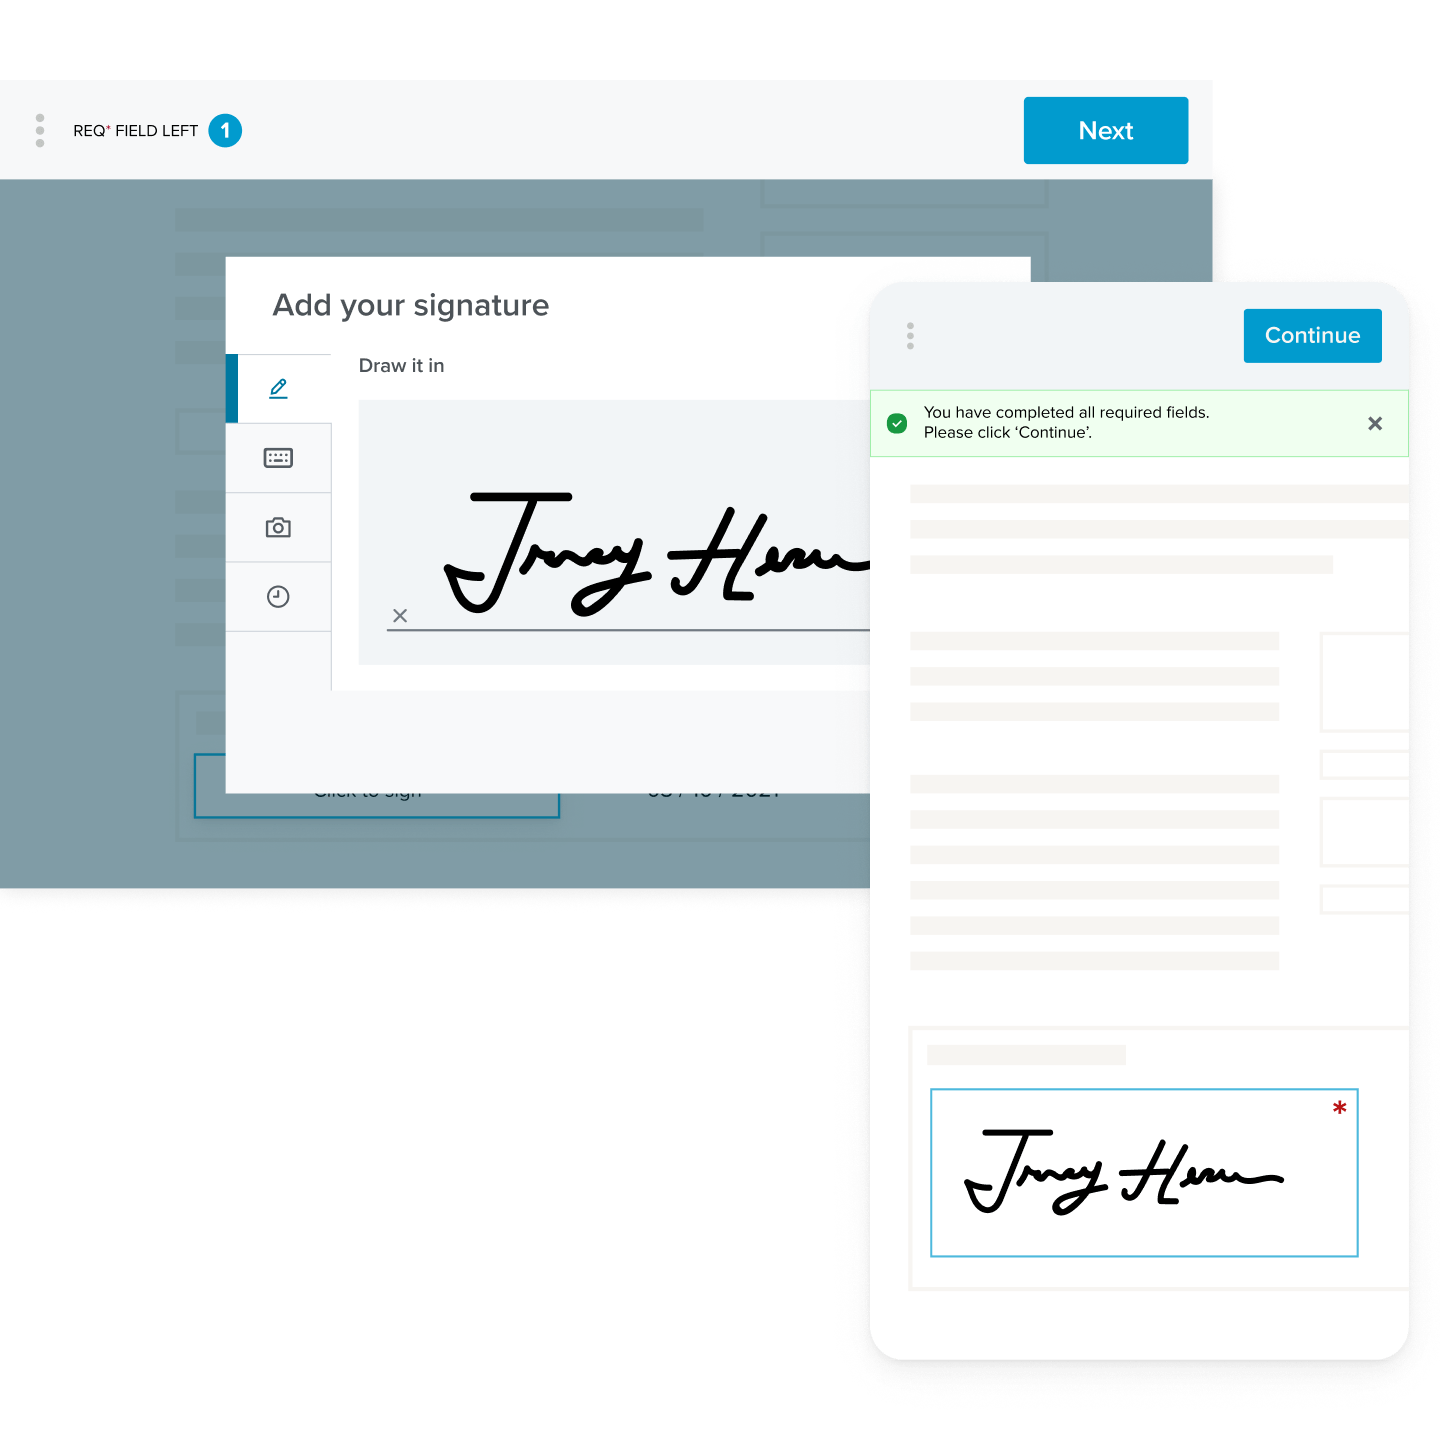 The e-signature interface, showing a signature that has been added to a form, on desktop and mobile devices